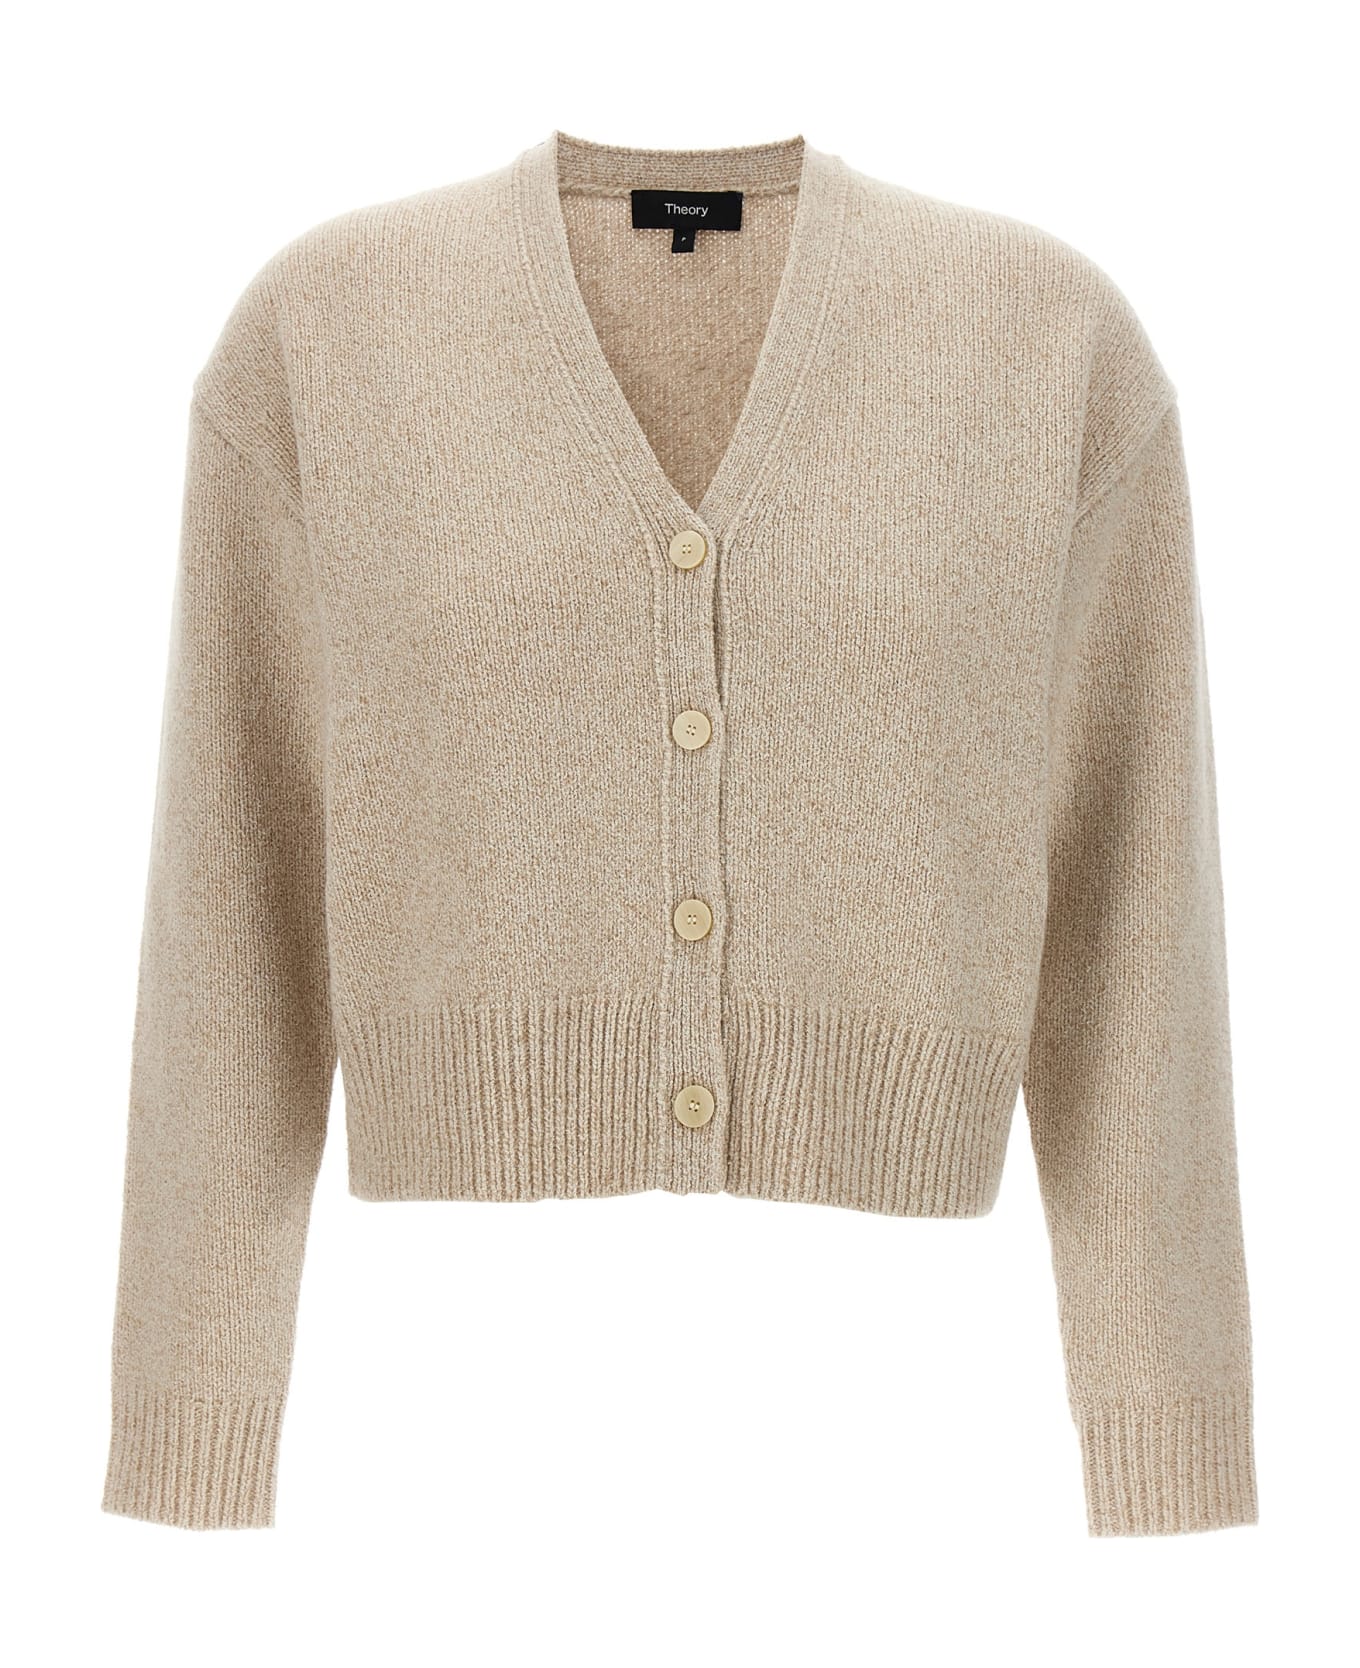 Theory Cropped Cardigan - Beige